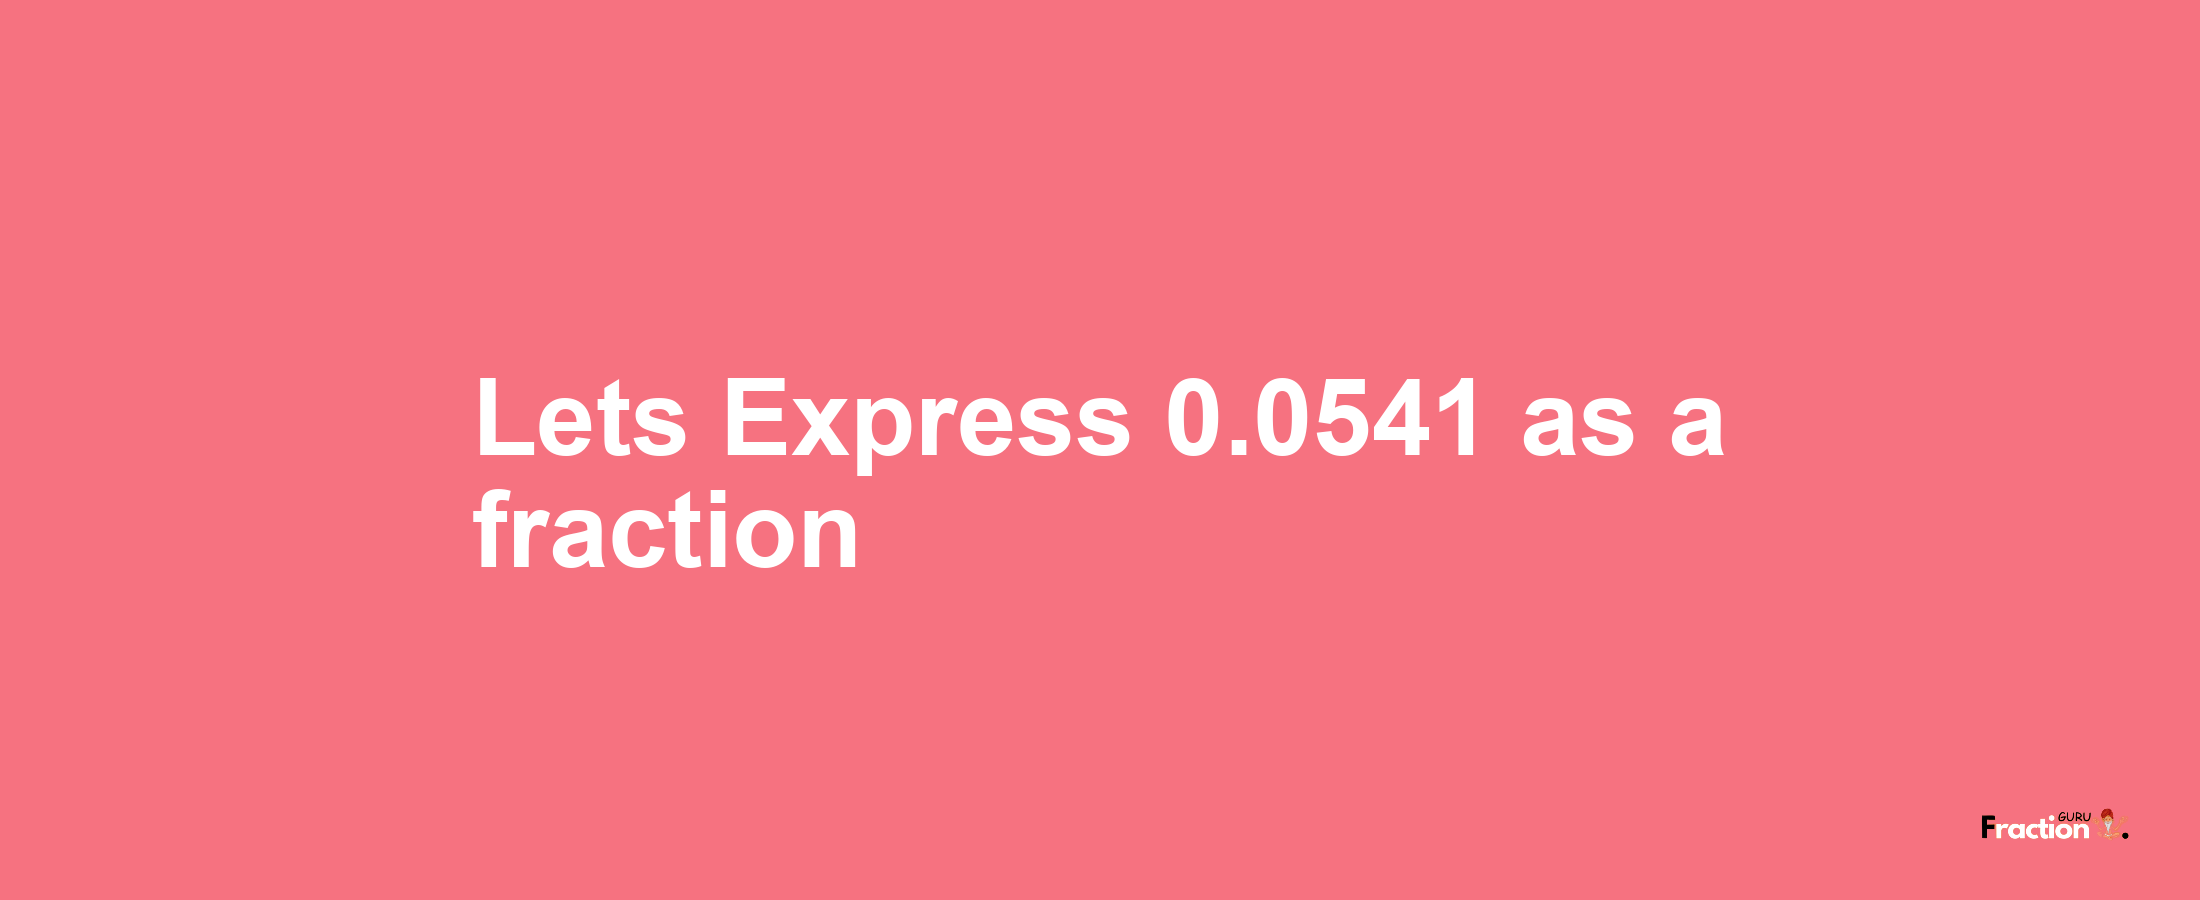 Lets Express 0.0541 as afraction